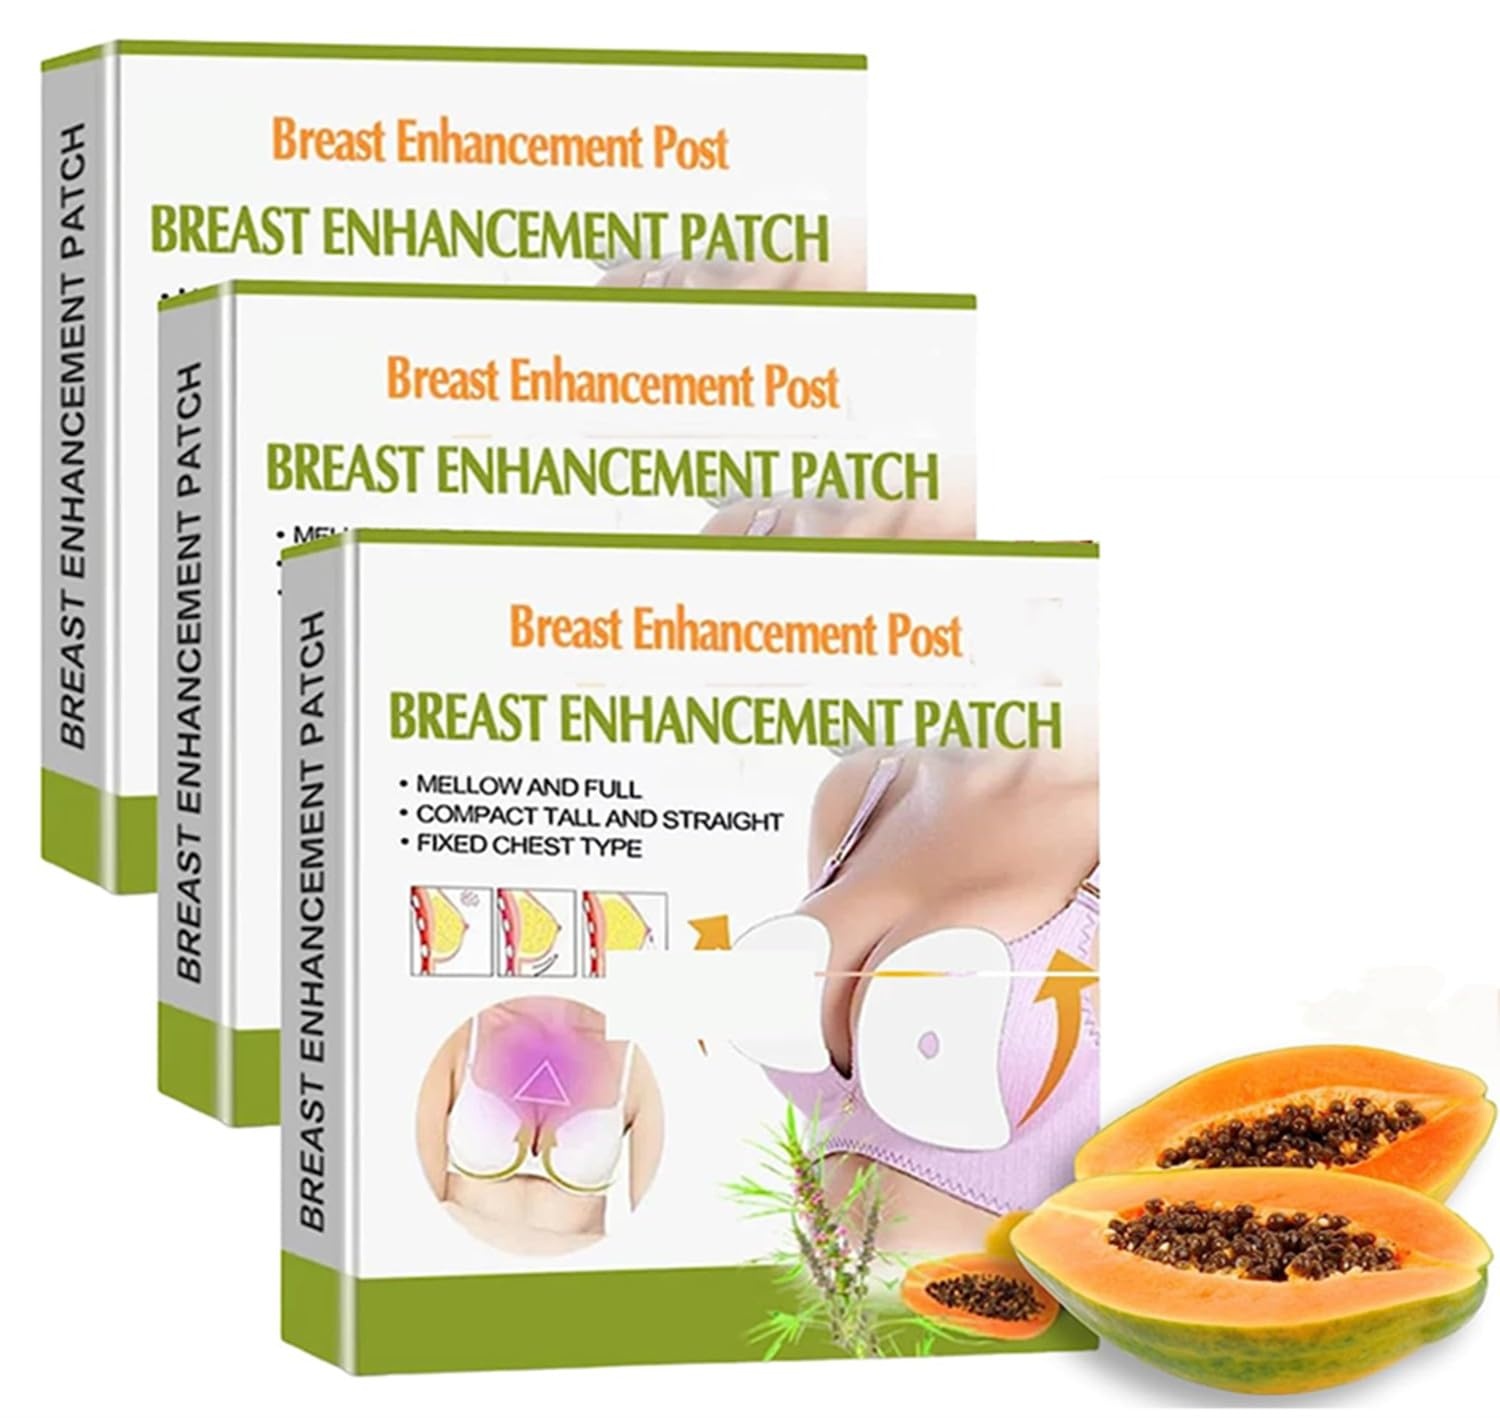 DYCECO Breast Enhancement Patch, 2023 New Breast Enhancement Patch, Breast Enhancement Mask Firming Patch, Breast Enhancement Upright Lifter Enlarger Patch, Anti-Sagging (3box)